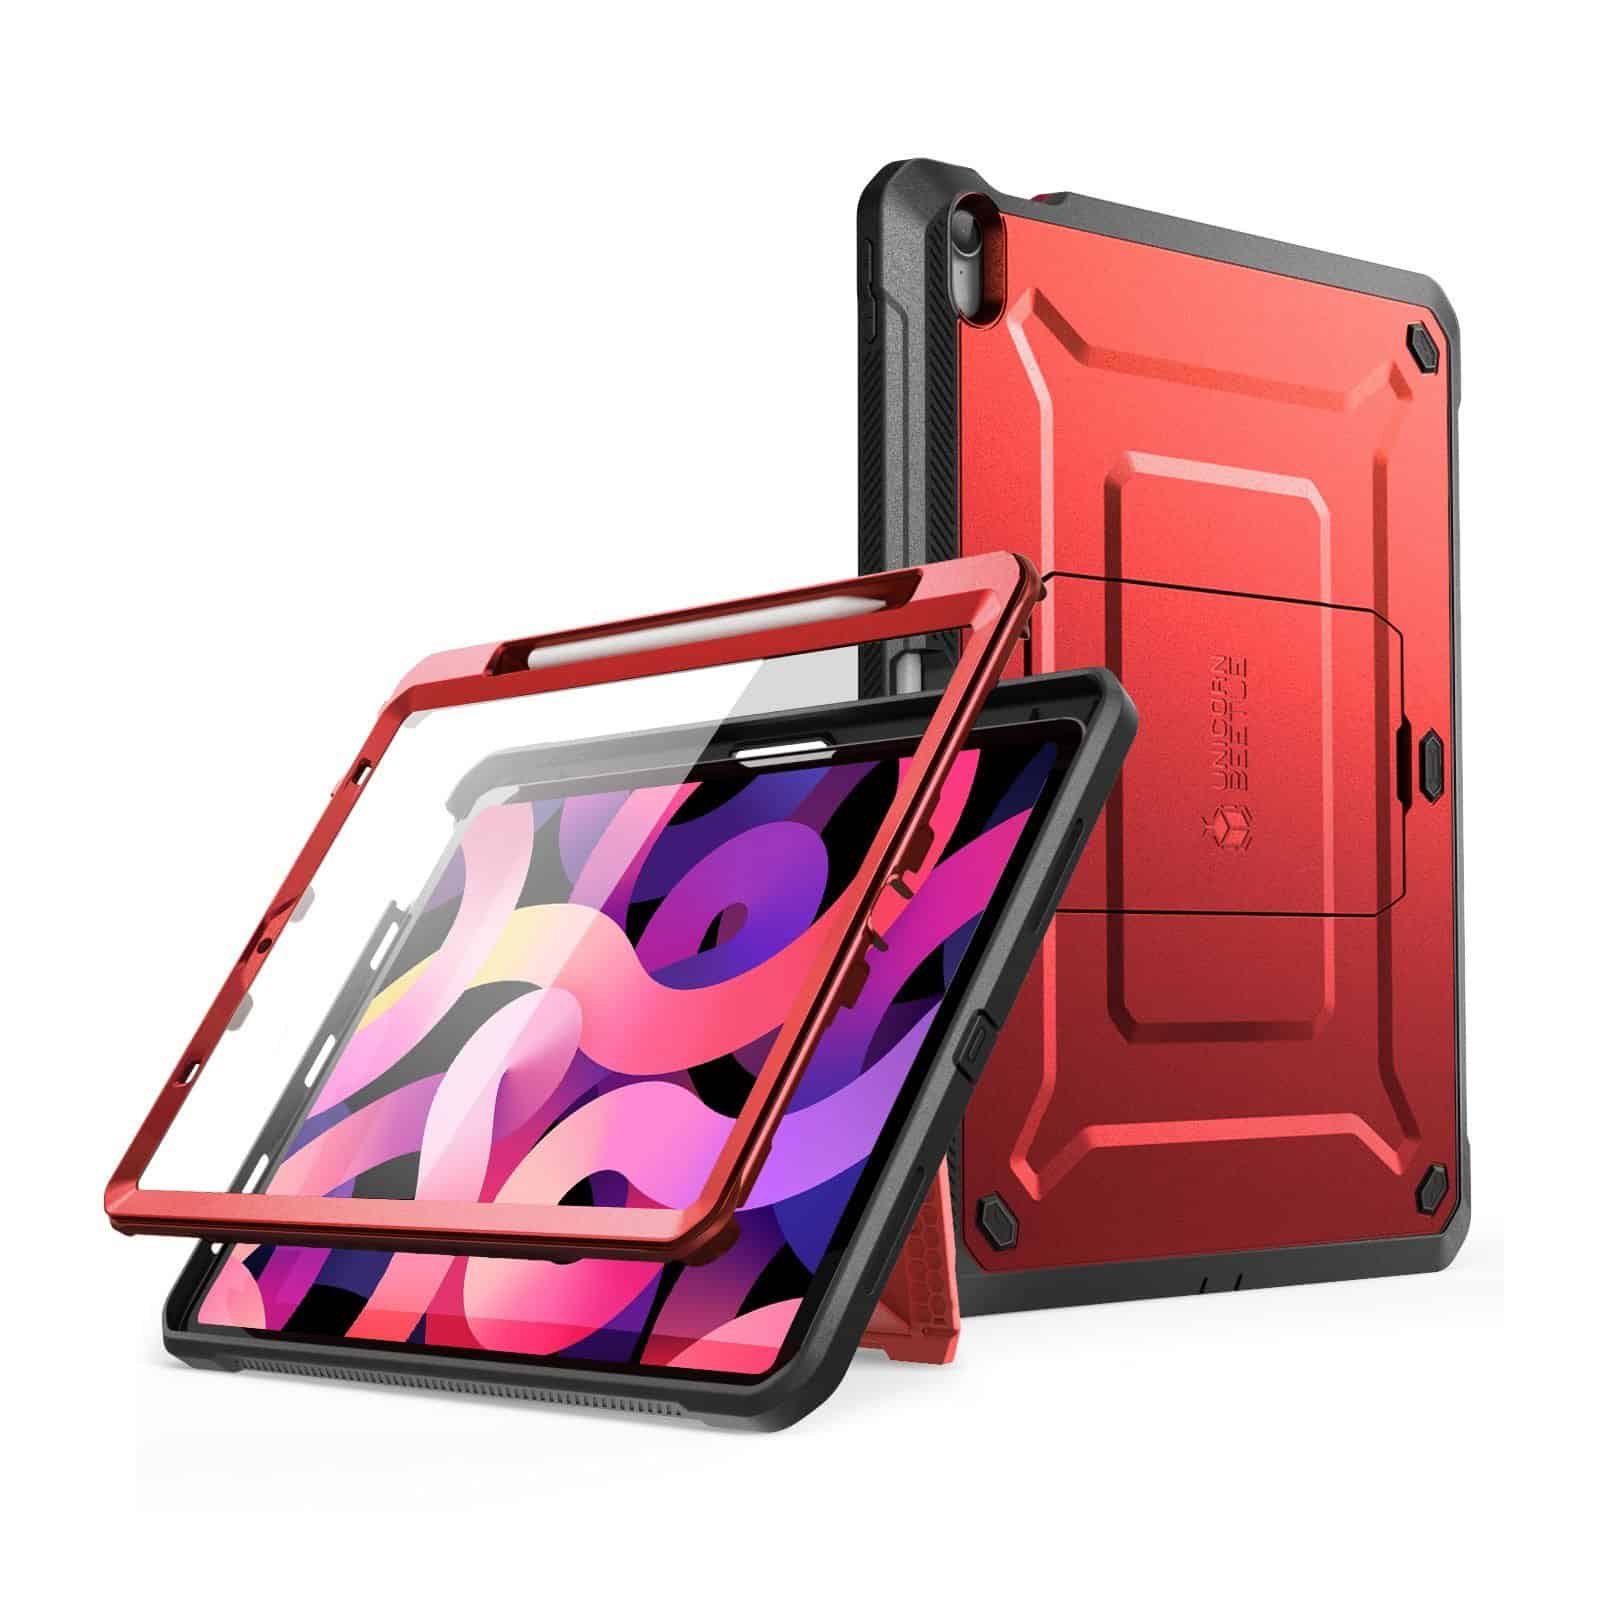 SUPCASE Full Cover Hoes iPad Air 5 - iPad Air 4 - 10.9 inch - - Rood